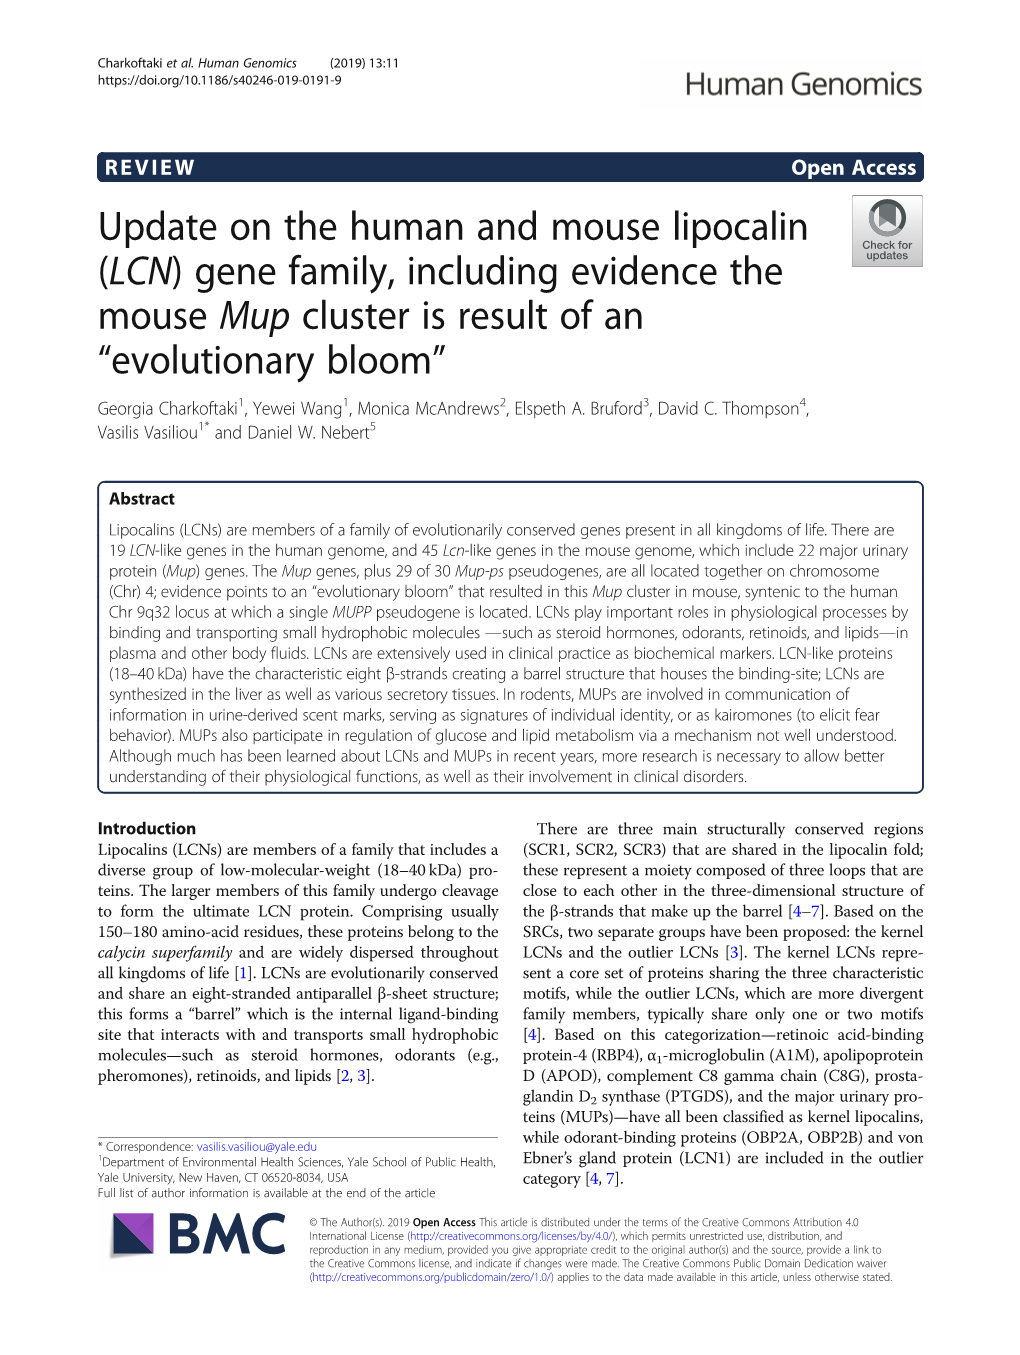 (LCN) Gene Family, Including Evidence the Mouse Mup Cluster Is Result of an “Evolutionary Bloom” Georgia Charkoftaki1, Yewei Wang1, Monica Mcandrews2, Elspeth A